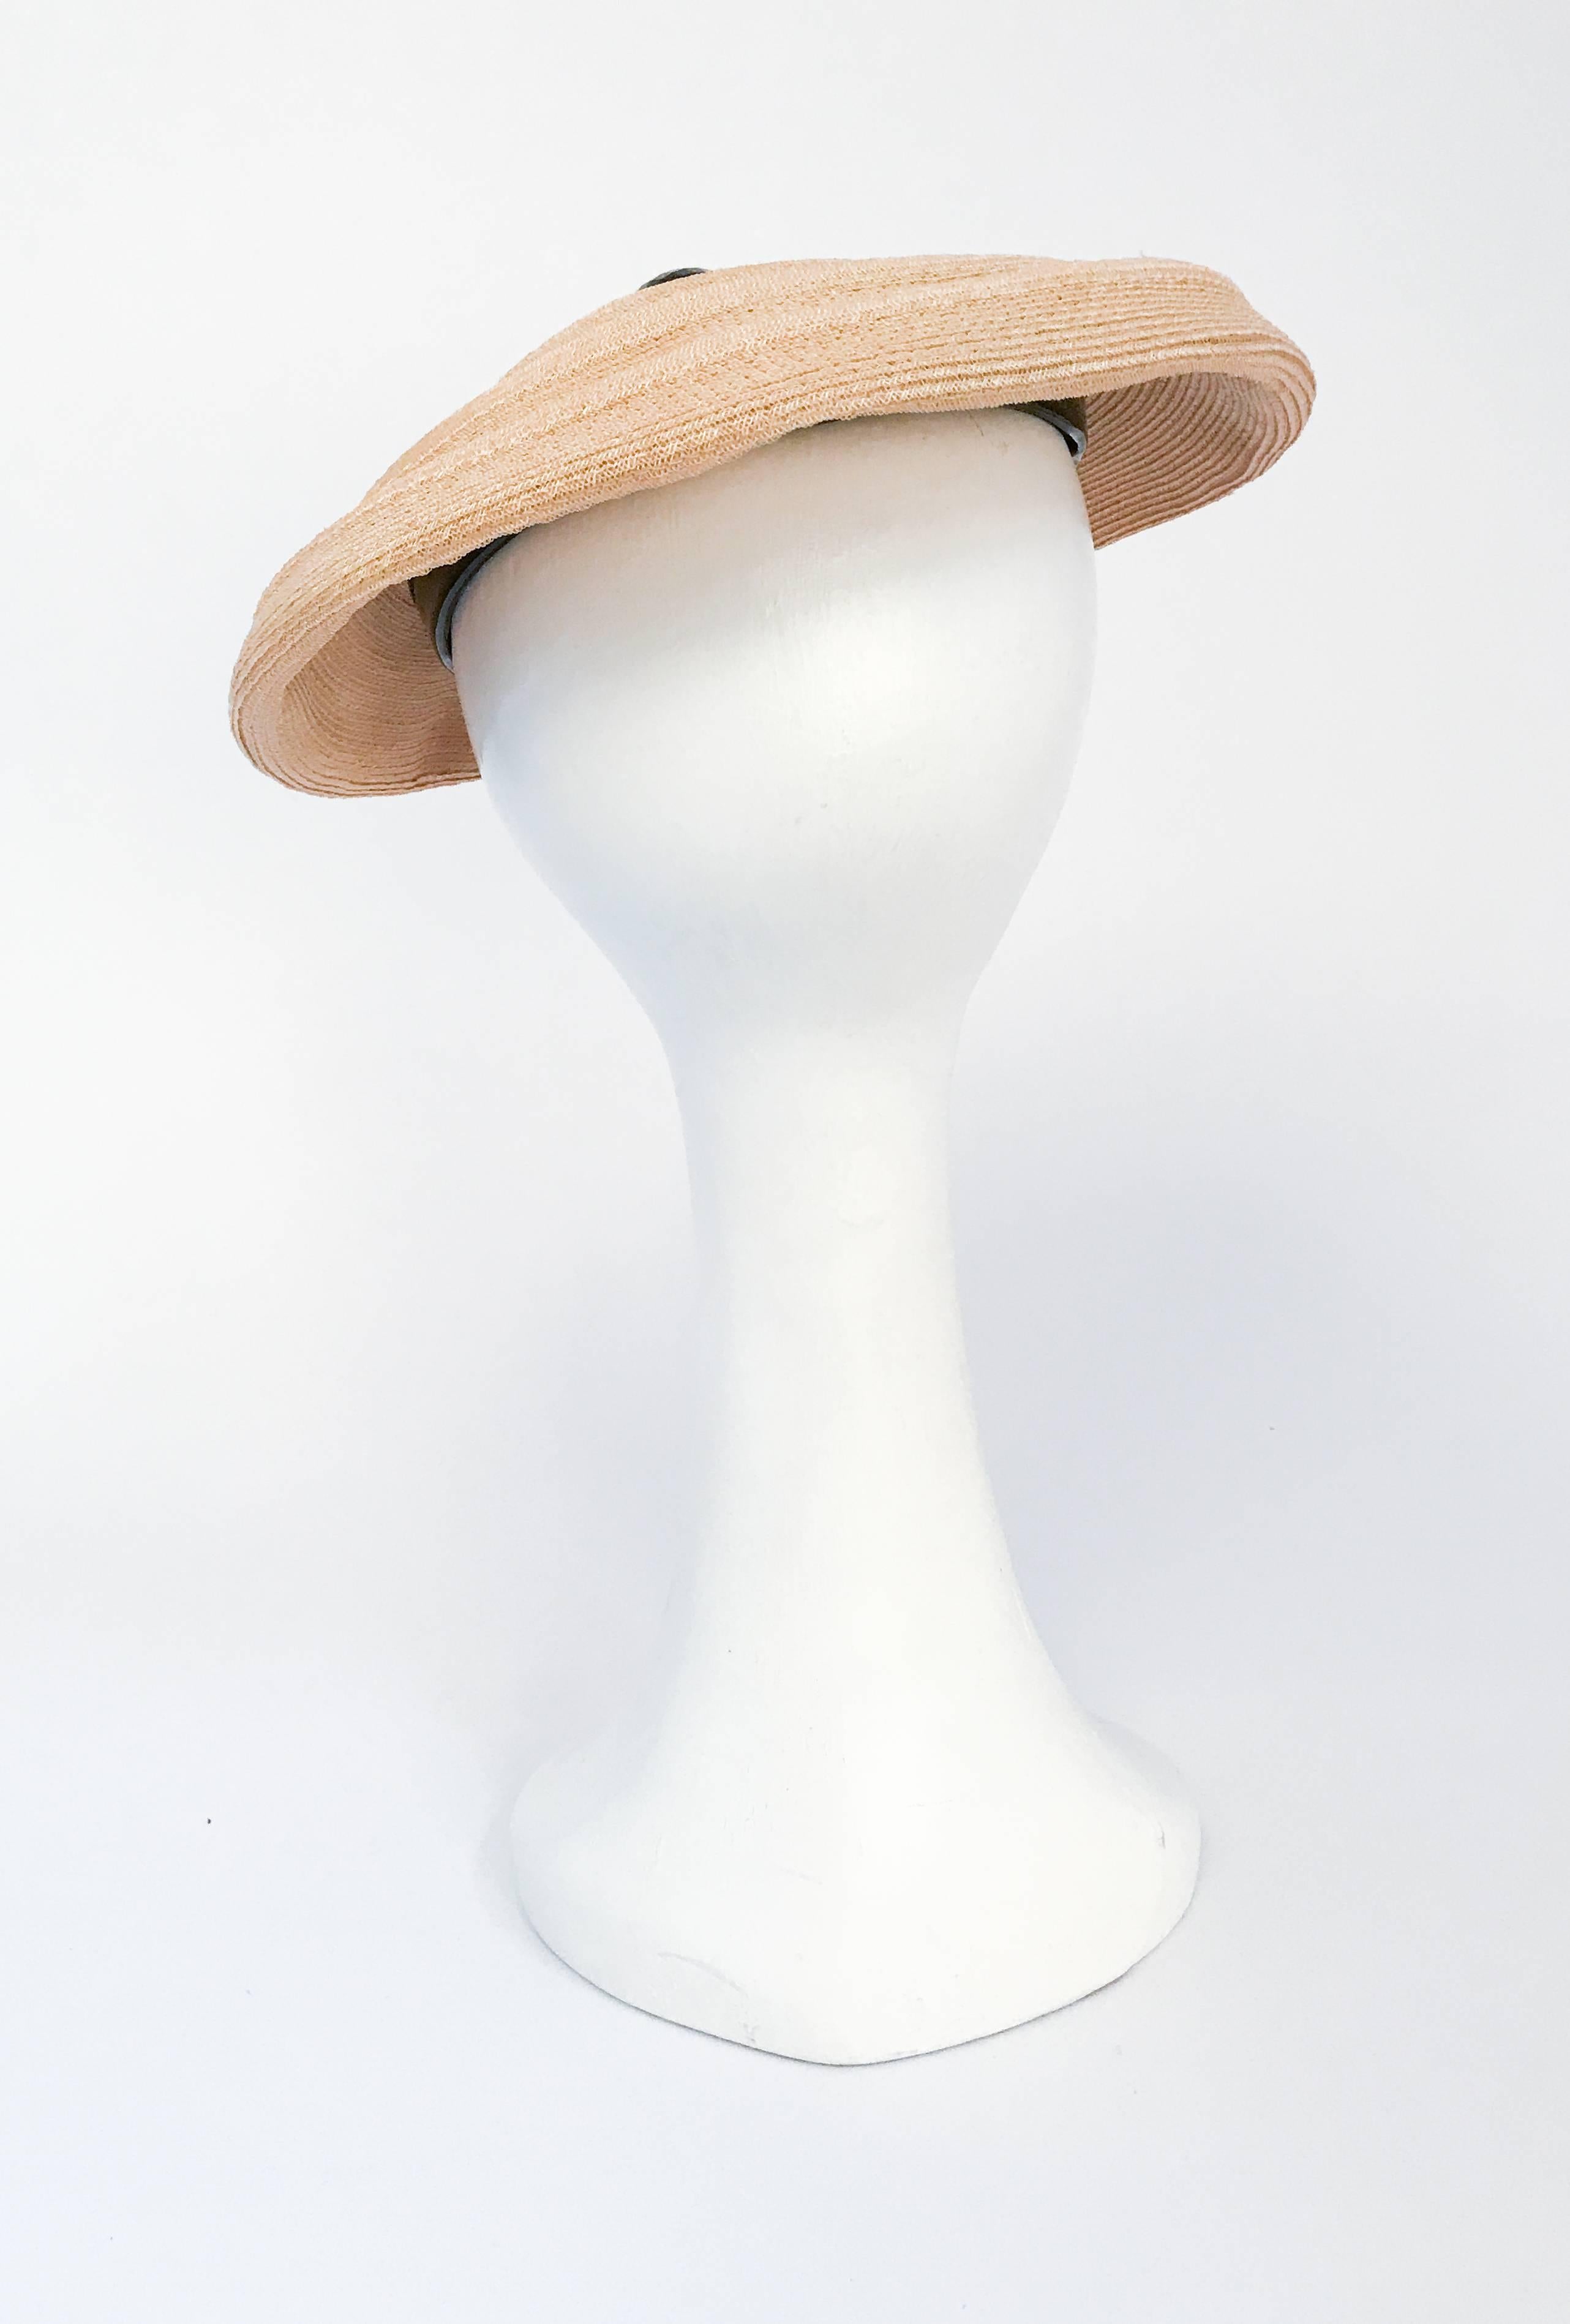 Beige Lilly Daché Woven Straw Hat with Glass Buttons, 1950s 